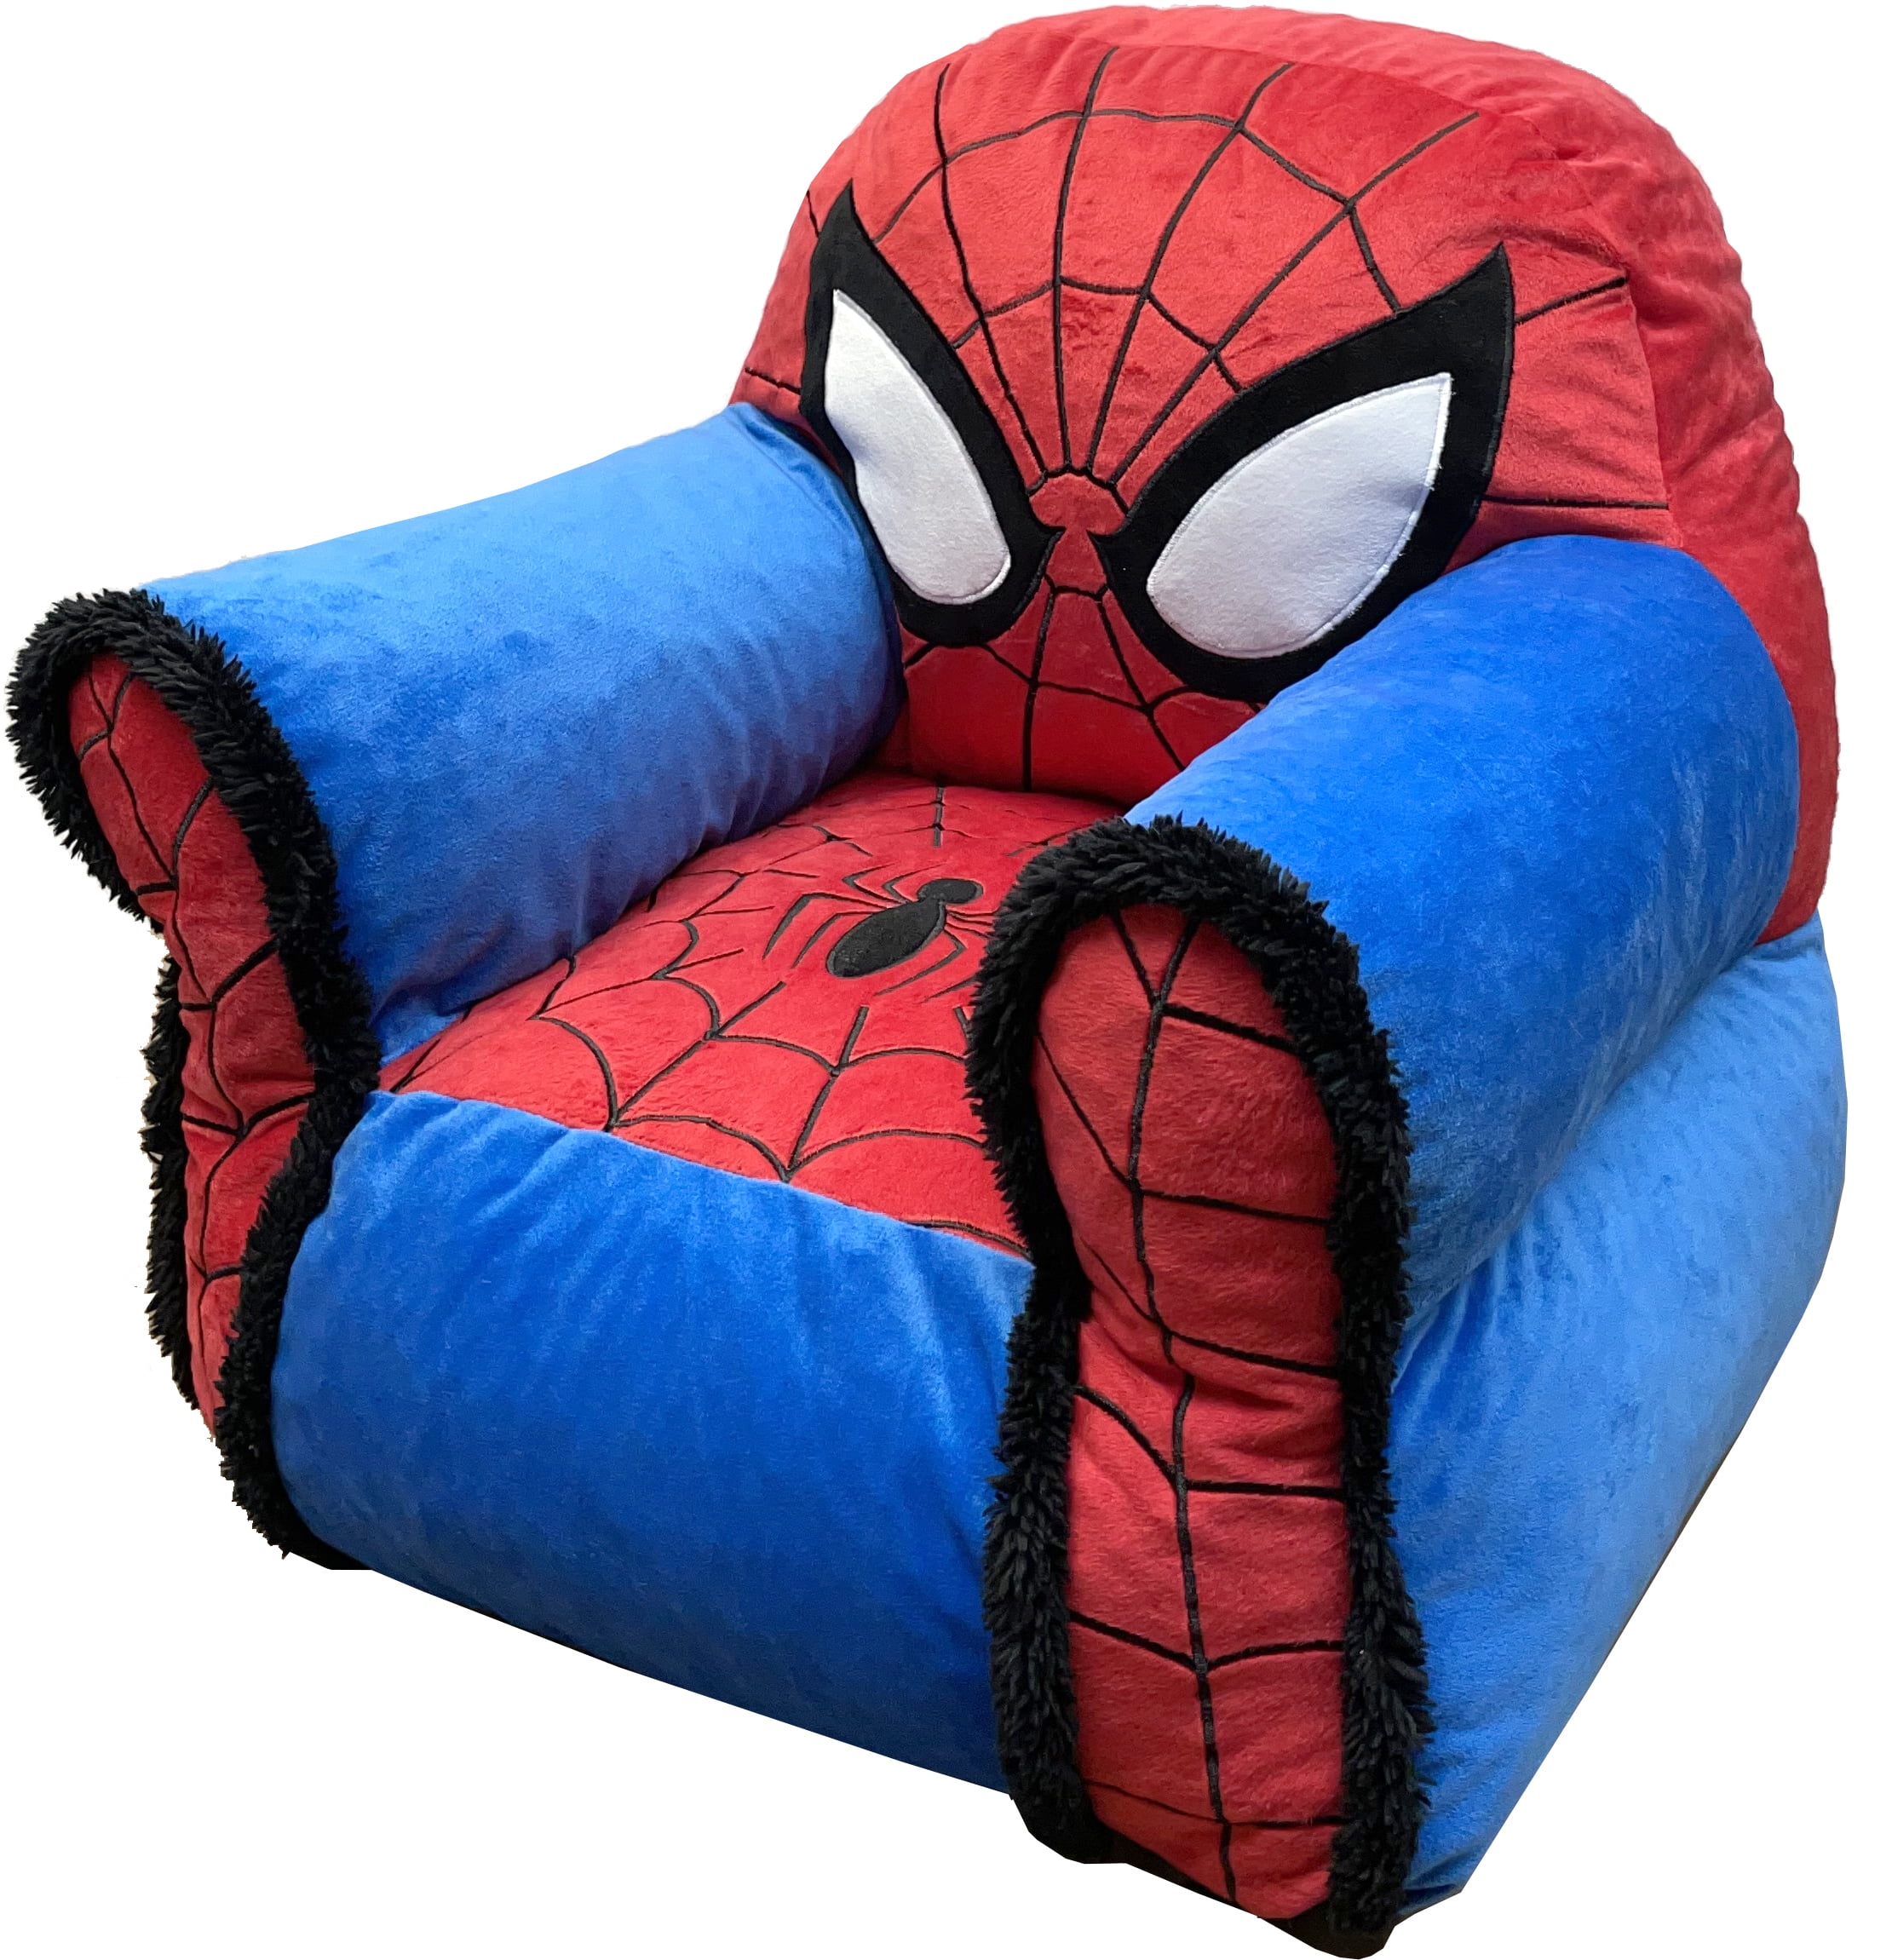 Details about   Marvel Spiderman Kids Plush Sofa Figural Bean Bag Chair With Sherpa Trimming USA 